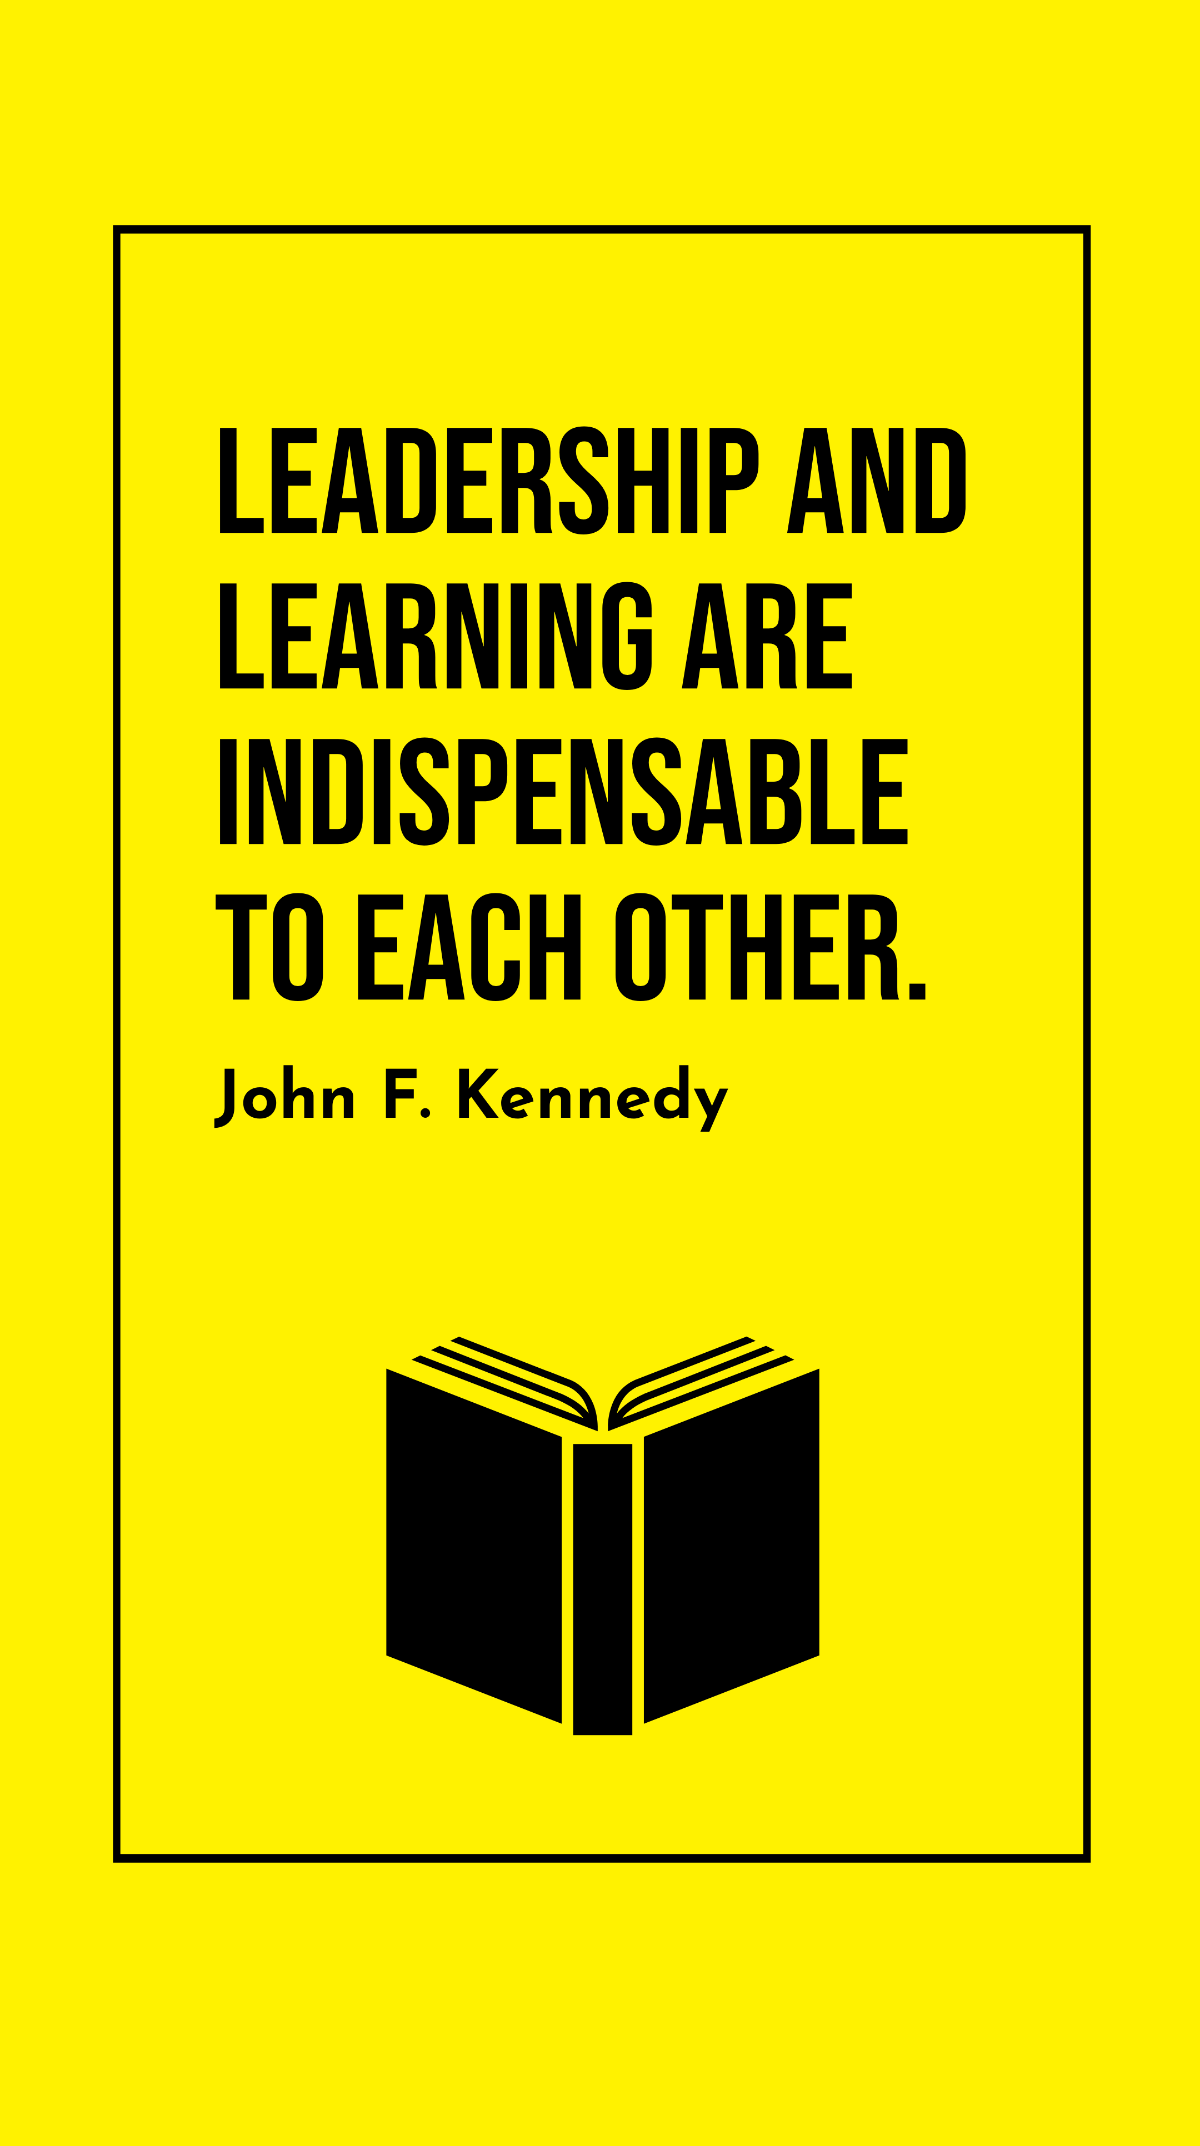 John F. Kennedy - Leadership and learning are indispensable to each other. Template